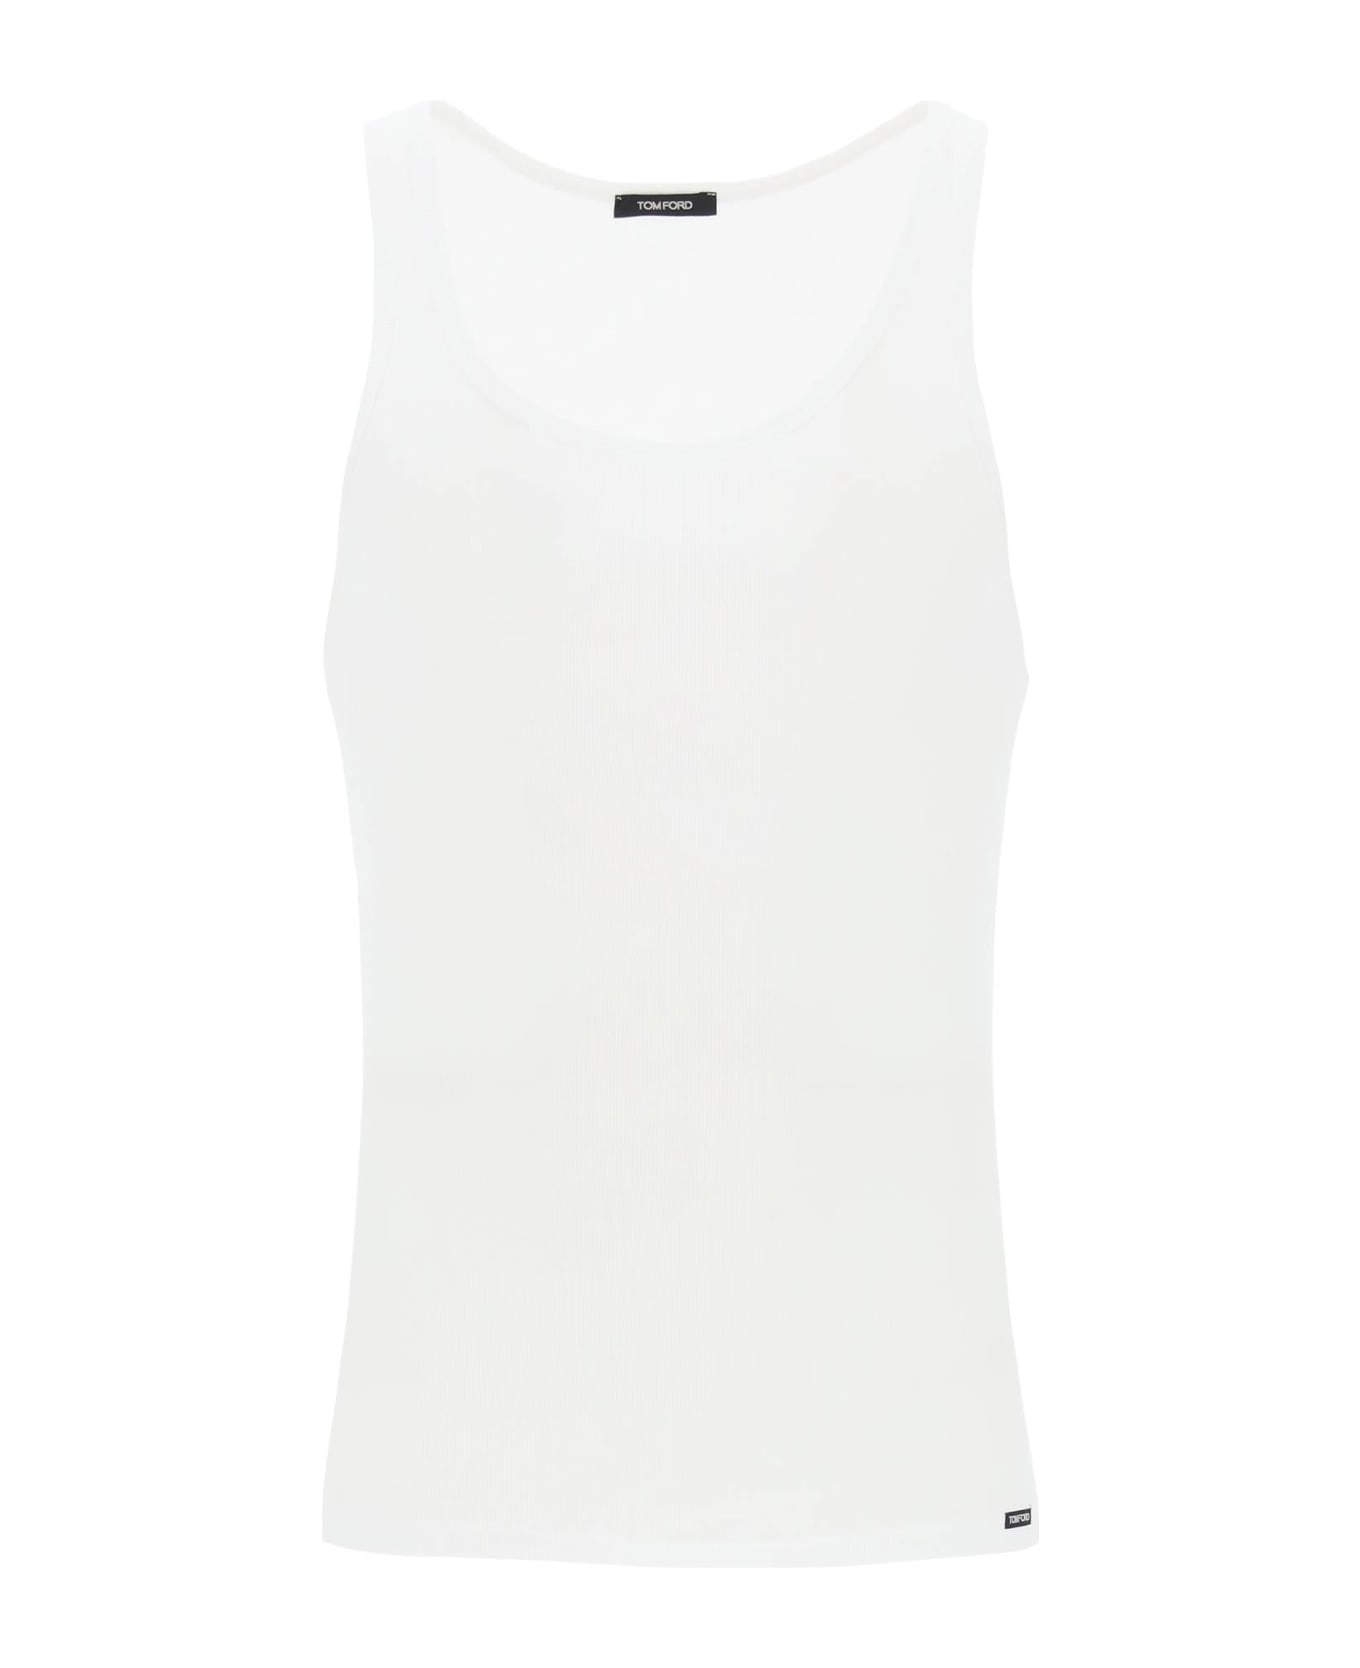 Tom Ford White Cotton And Modal Tank Top - BIANCO (White)